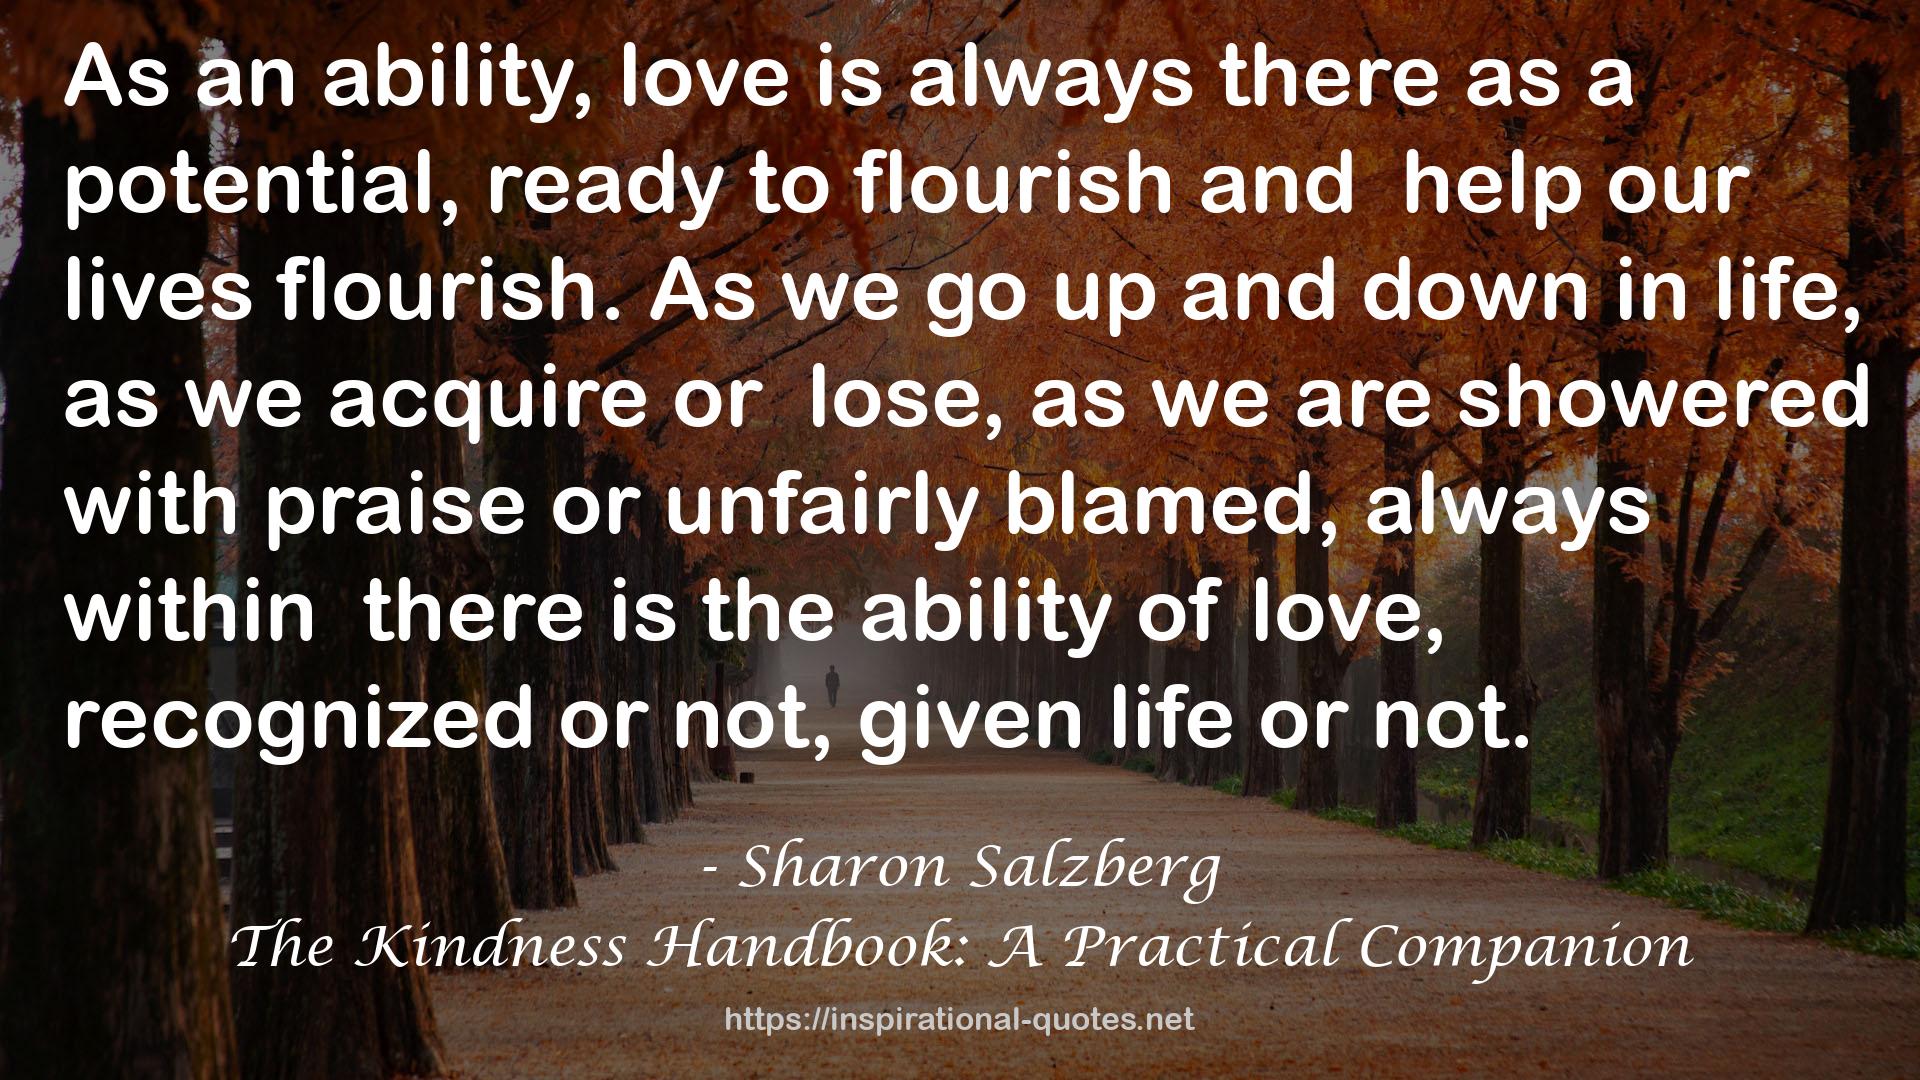 The Kindness Handbook: A Practical Companion QUOTES